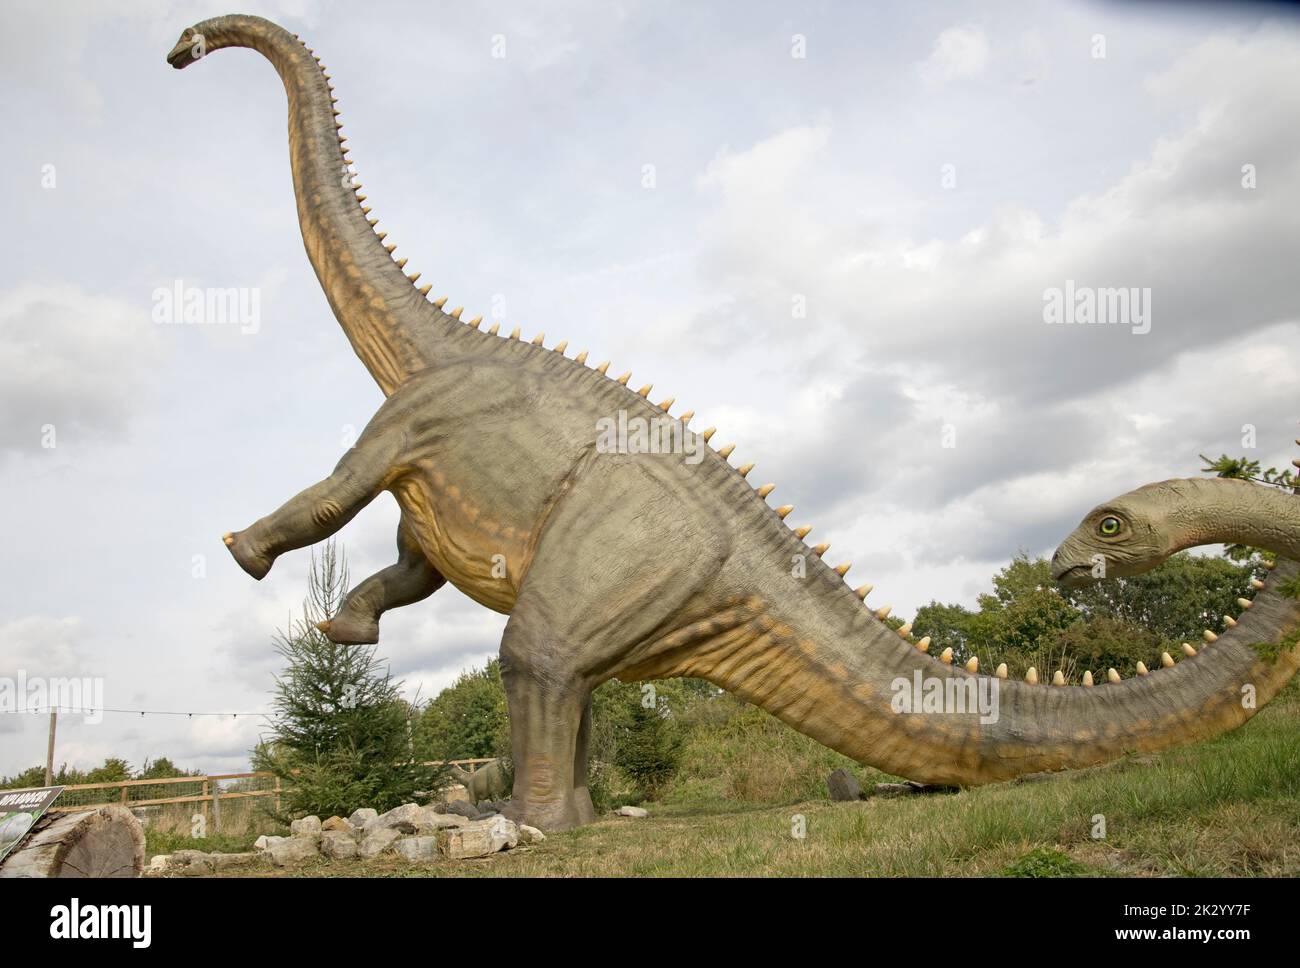 Lifesize model of Apatosaurus an herbivorous sauropod dinosaur that lived in the Late Jurassic All Things Wild, Honeybourne, UK Stock Photo